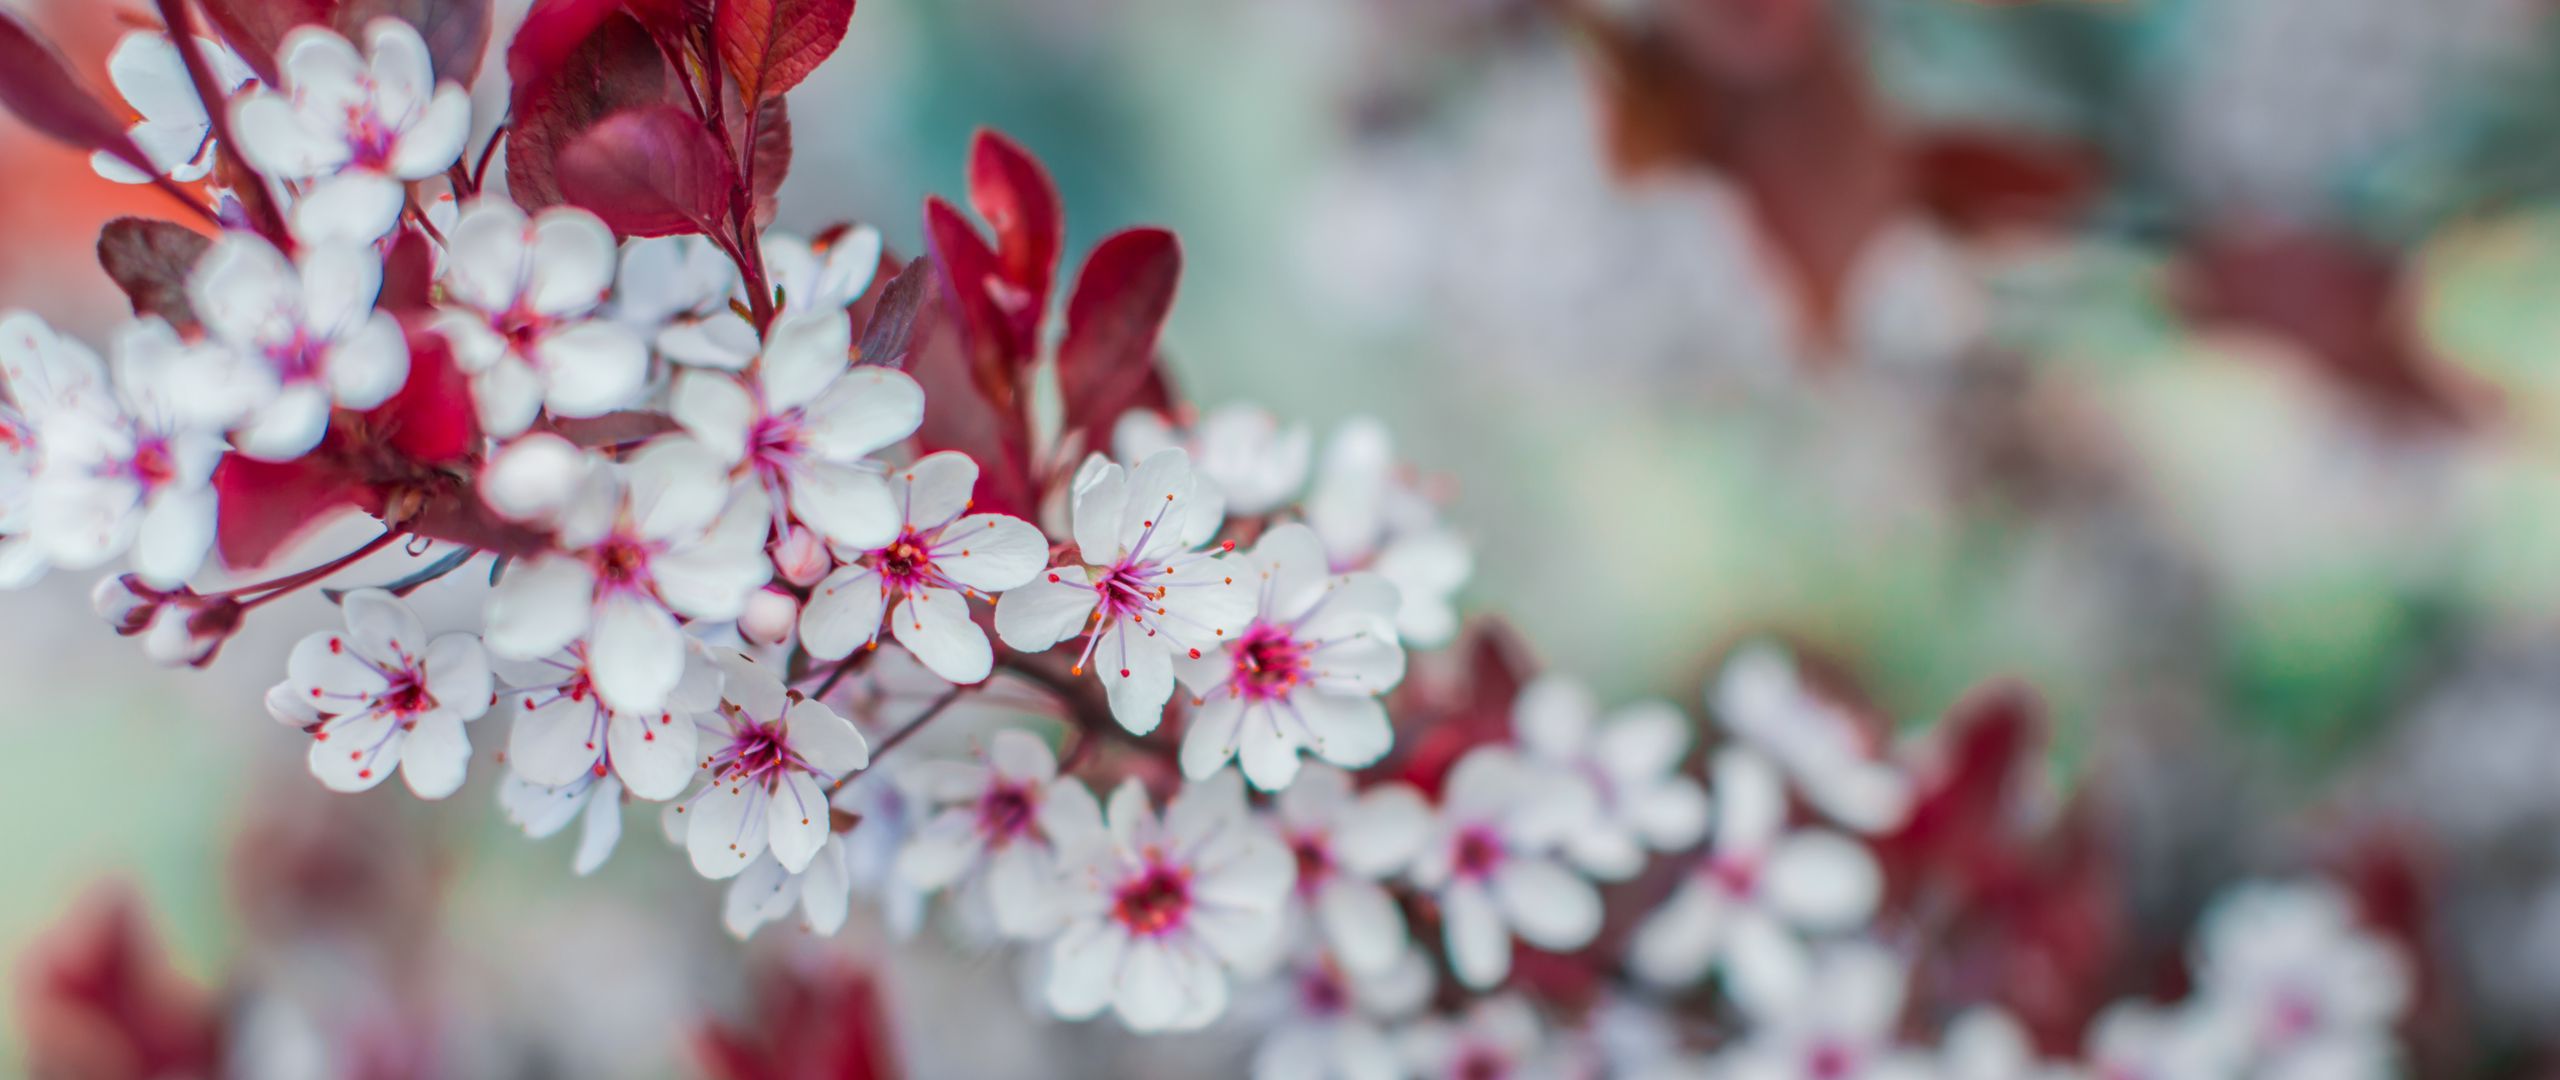 Download wallpaper 2560x1080 flowers, bloom, branch, spring dual wide 1080p HD background